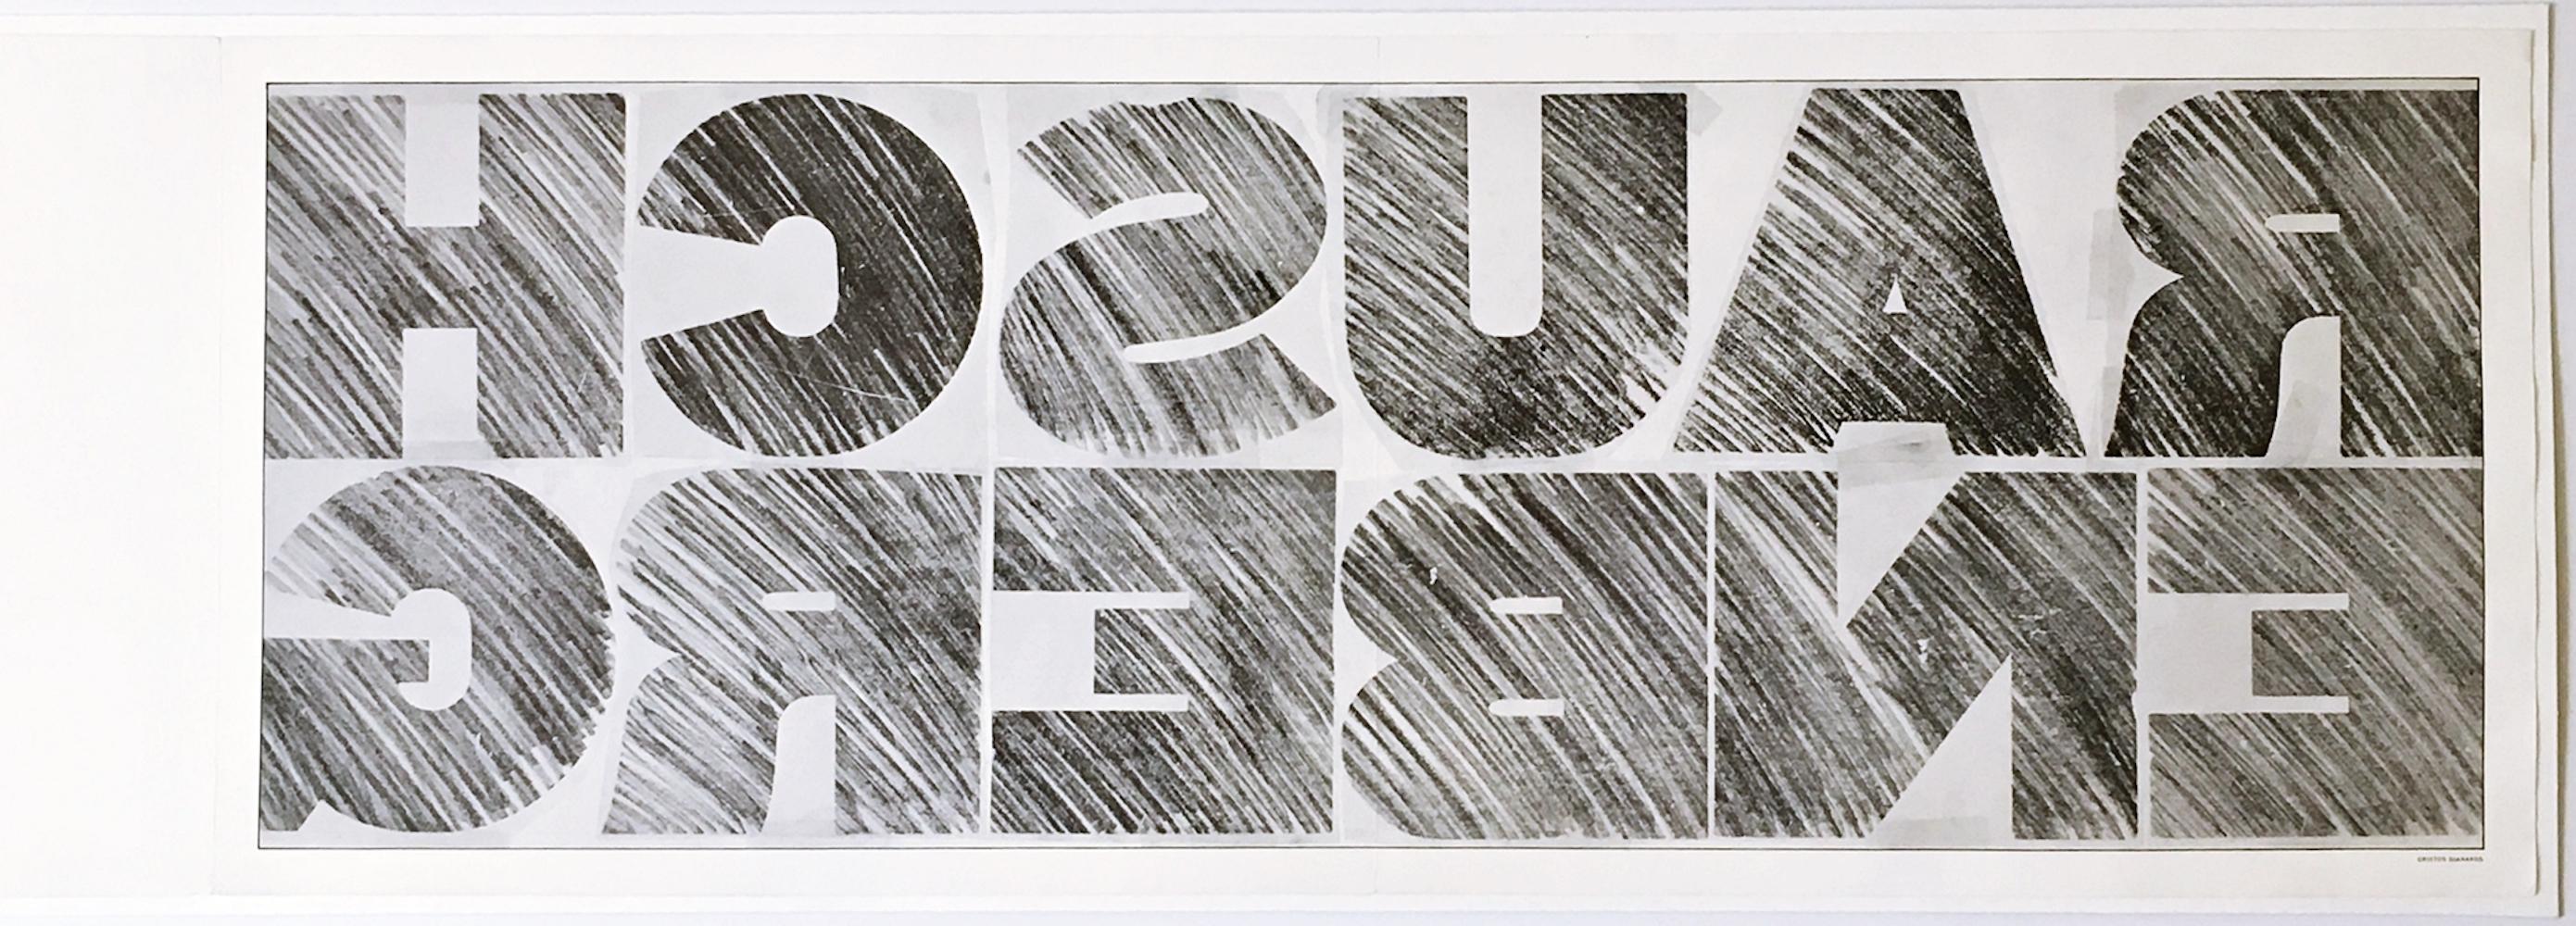 RAUSCHENBERG (Scarce and collectible early invitation) - Print by Robert Rauschenberg